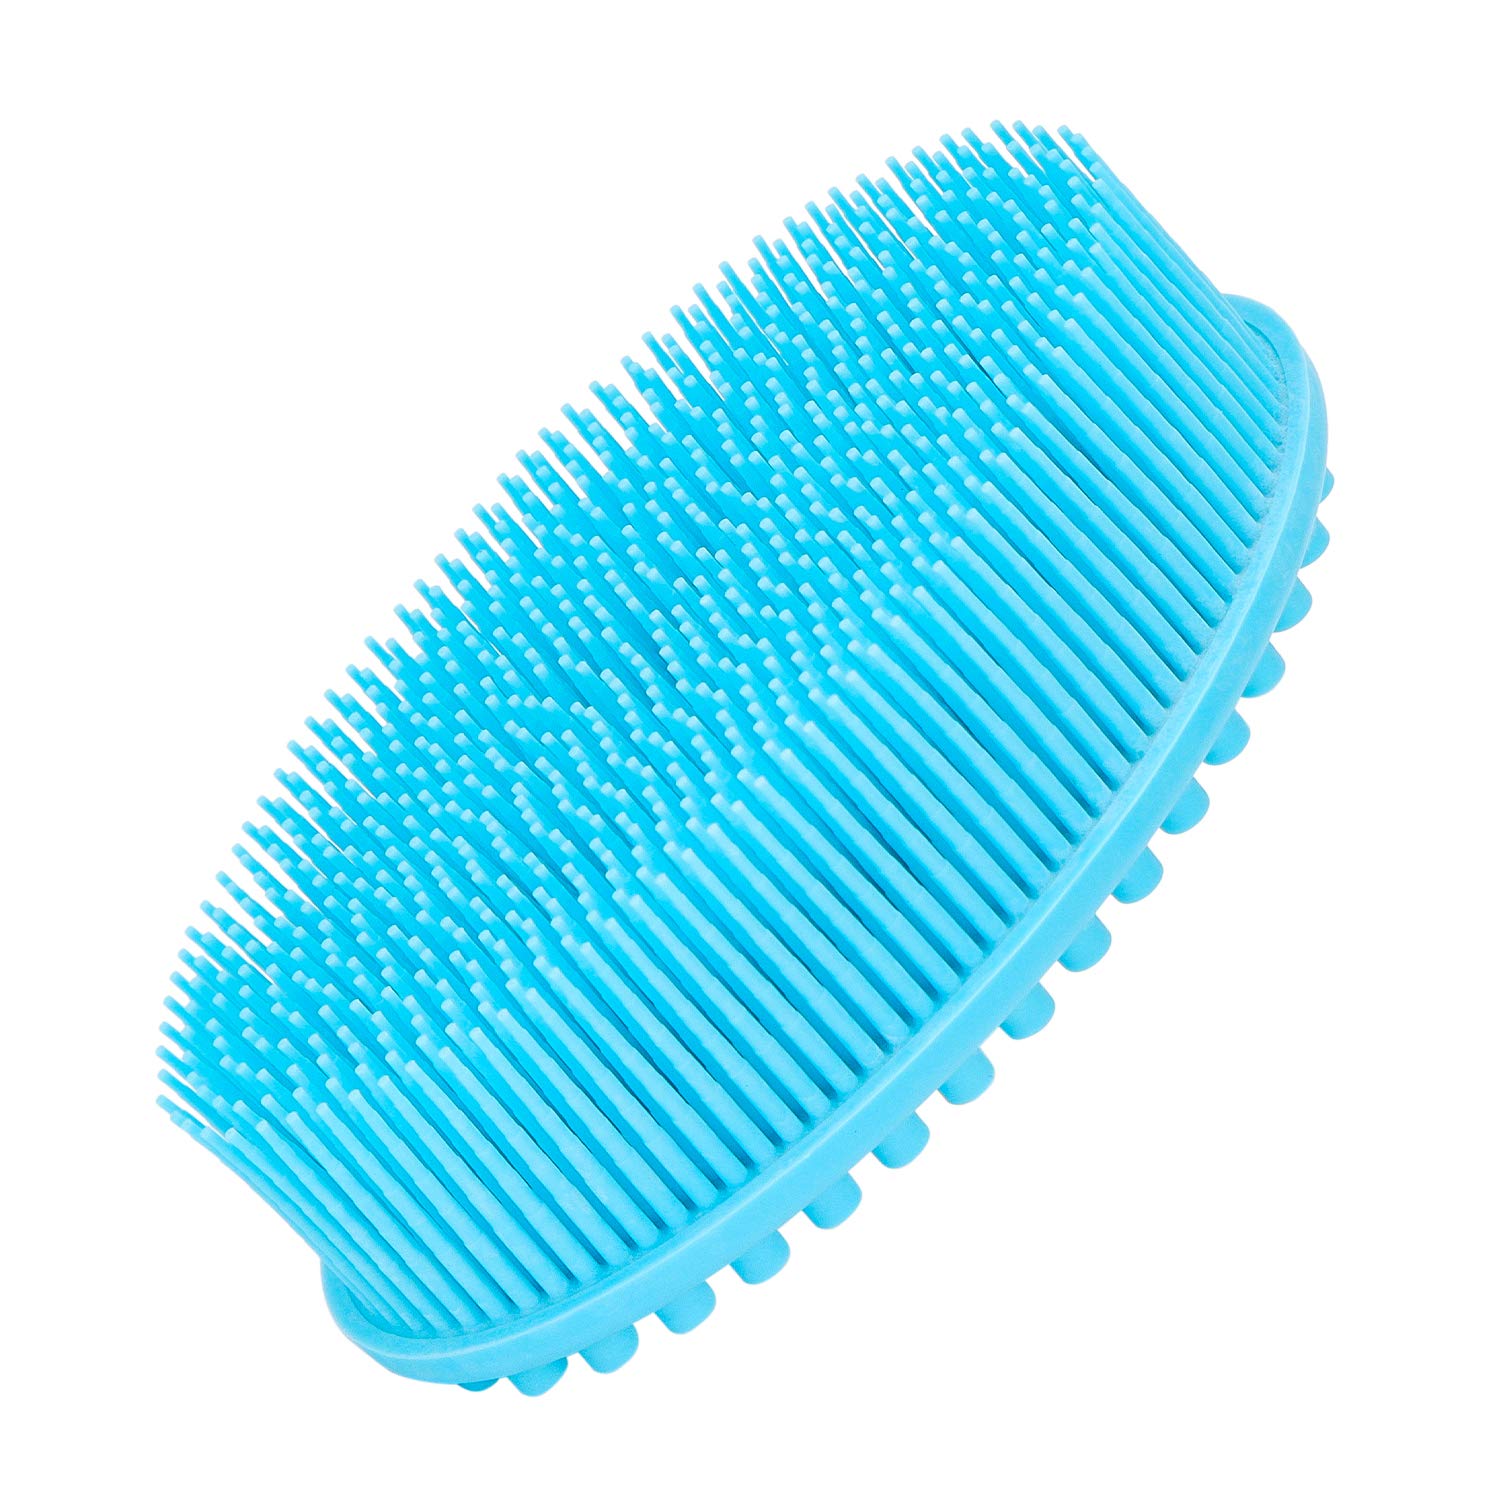 Silicone Bath Shower Loofah Brush, 100% Silicone Gentle Back Scrubber, Best Body exfoliating loofa Brush Gift for Baby Kids Men Father Mother Wife Family (Blue)